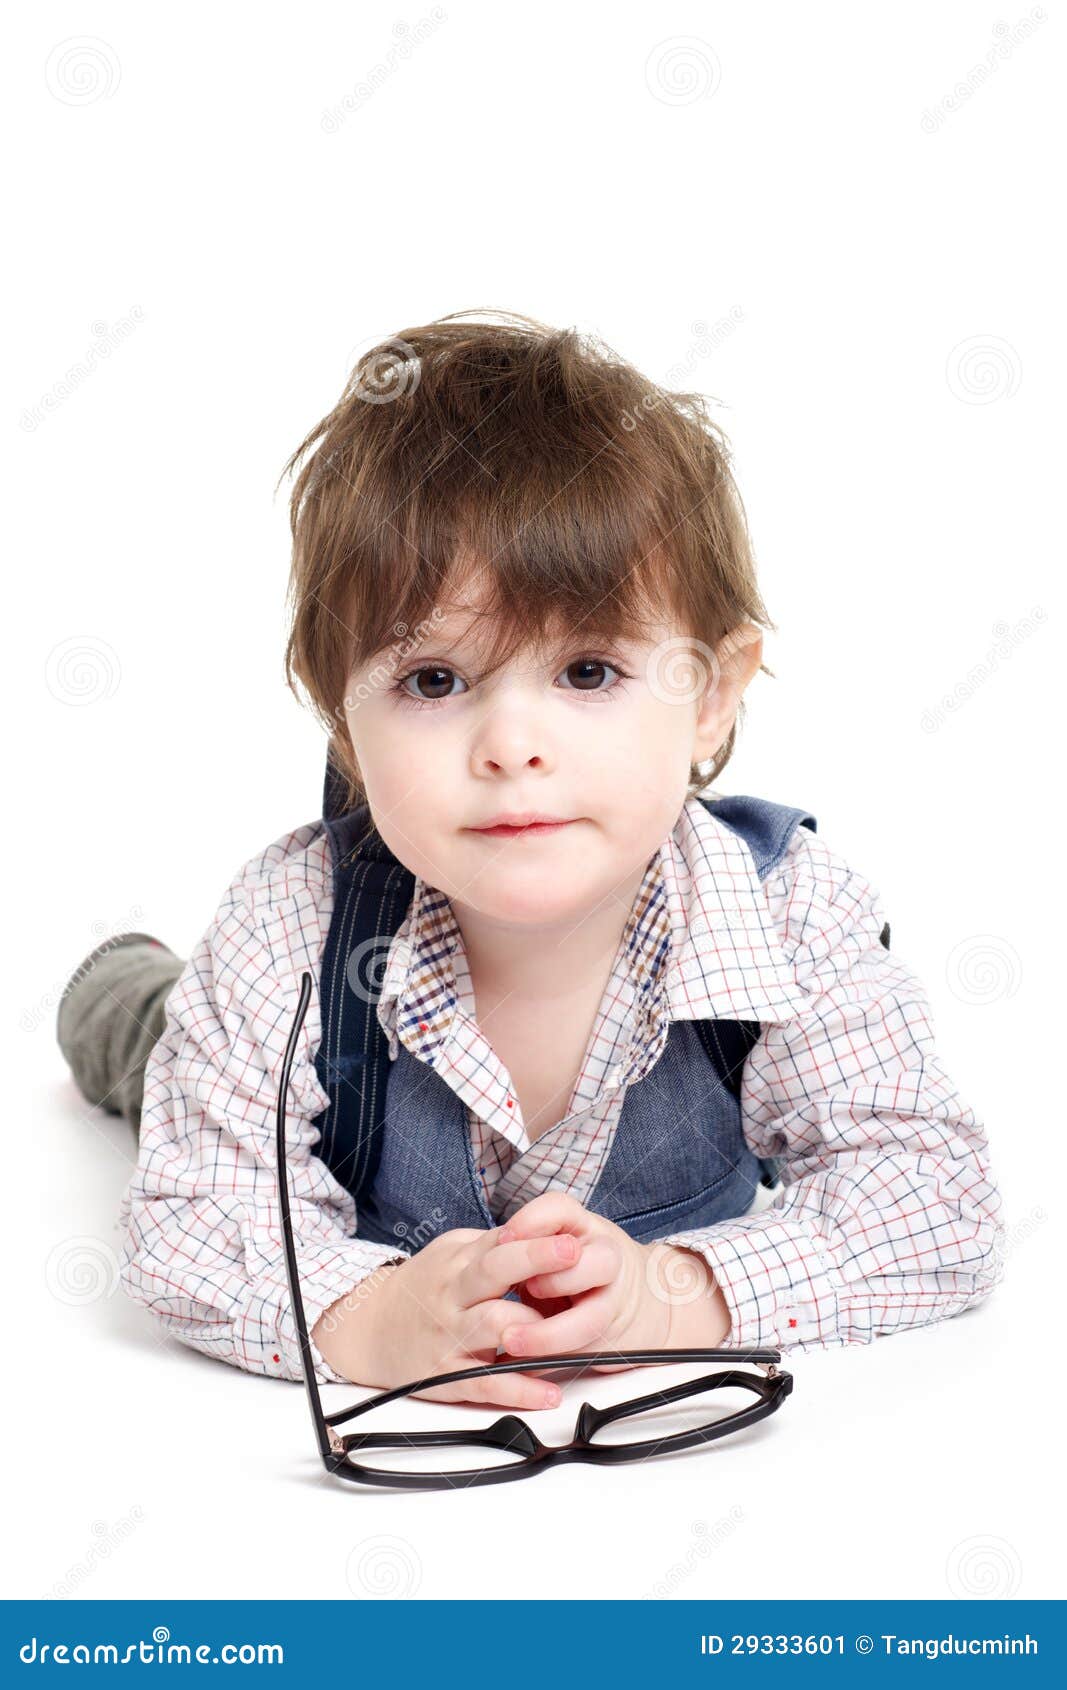 Cute Smart Baby Kid With Glasses Stock Image - Image: 29333601